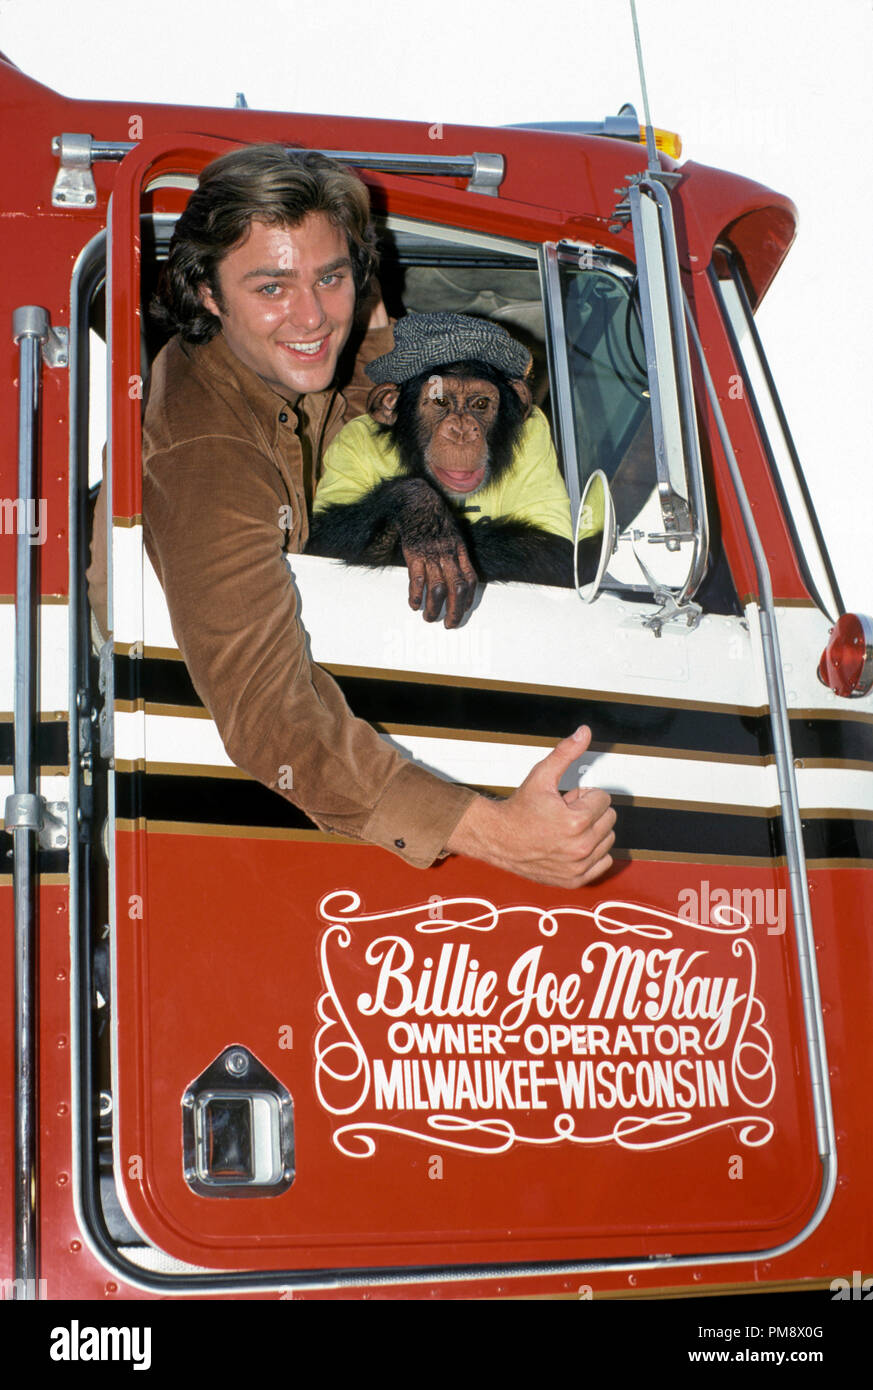 Studio Publicity Still from "BJ and the Bear" Greg Evigan 1979 All Rights Reserved File